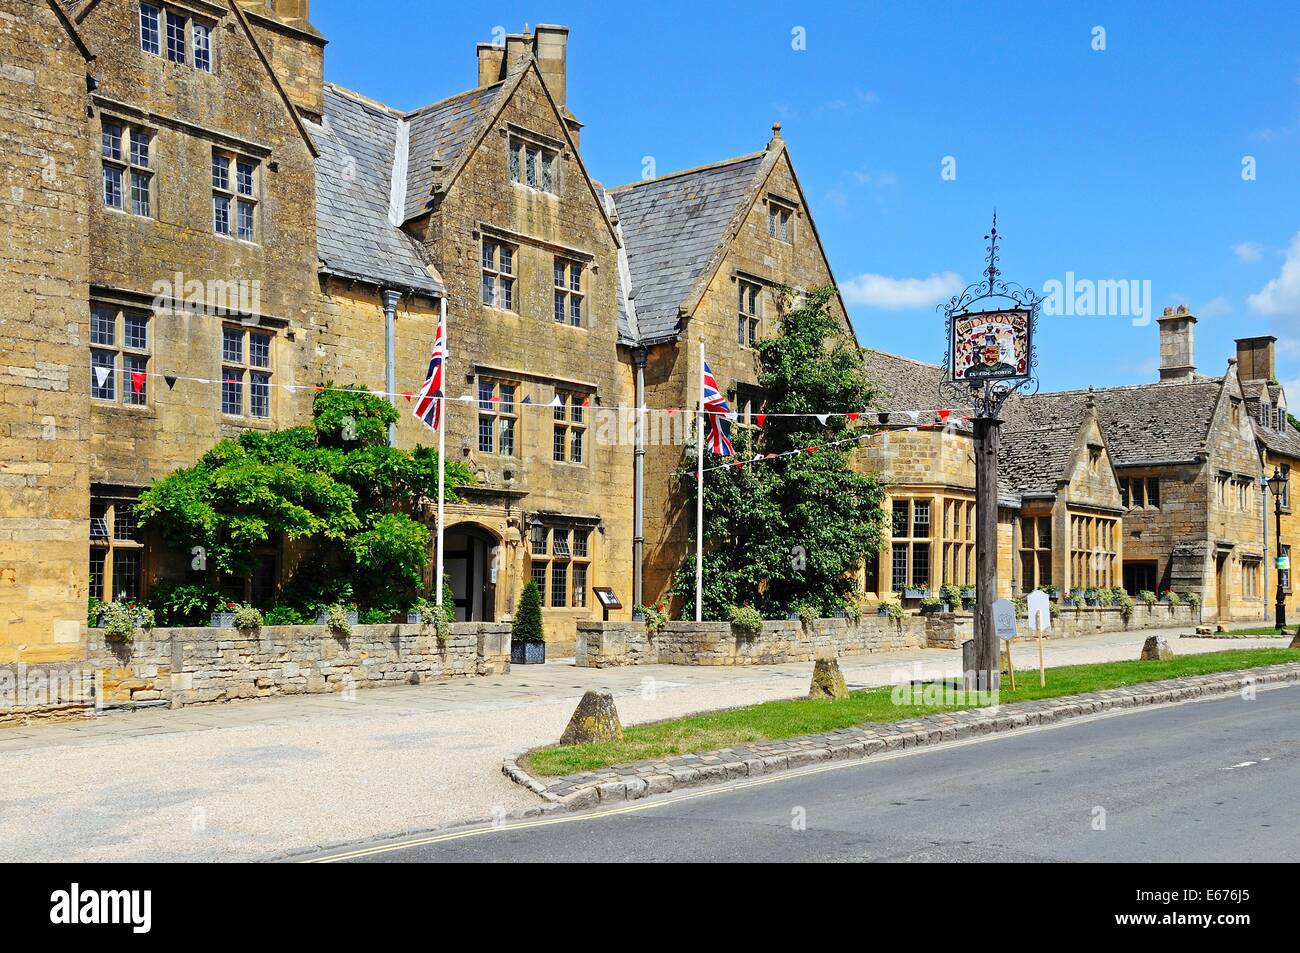 View of The Lygon Arms Hotel along High Street, Broadway, Cotswolds, Worcestershire, England, UK, Western Europe. Stock Photo